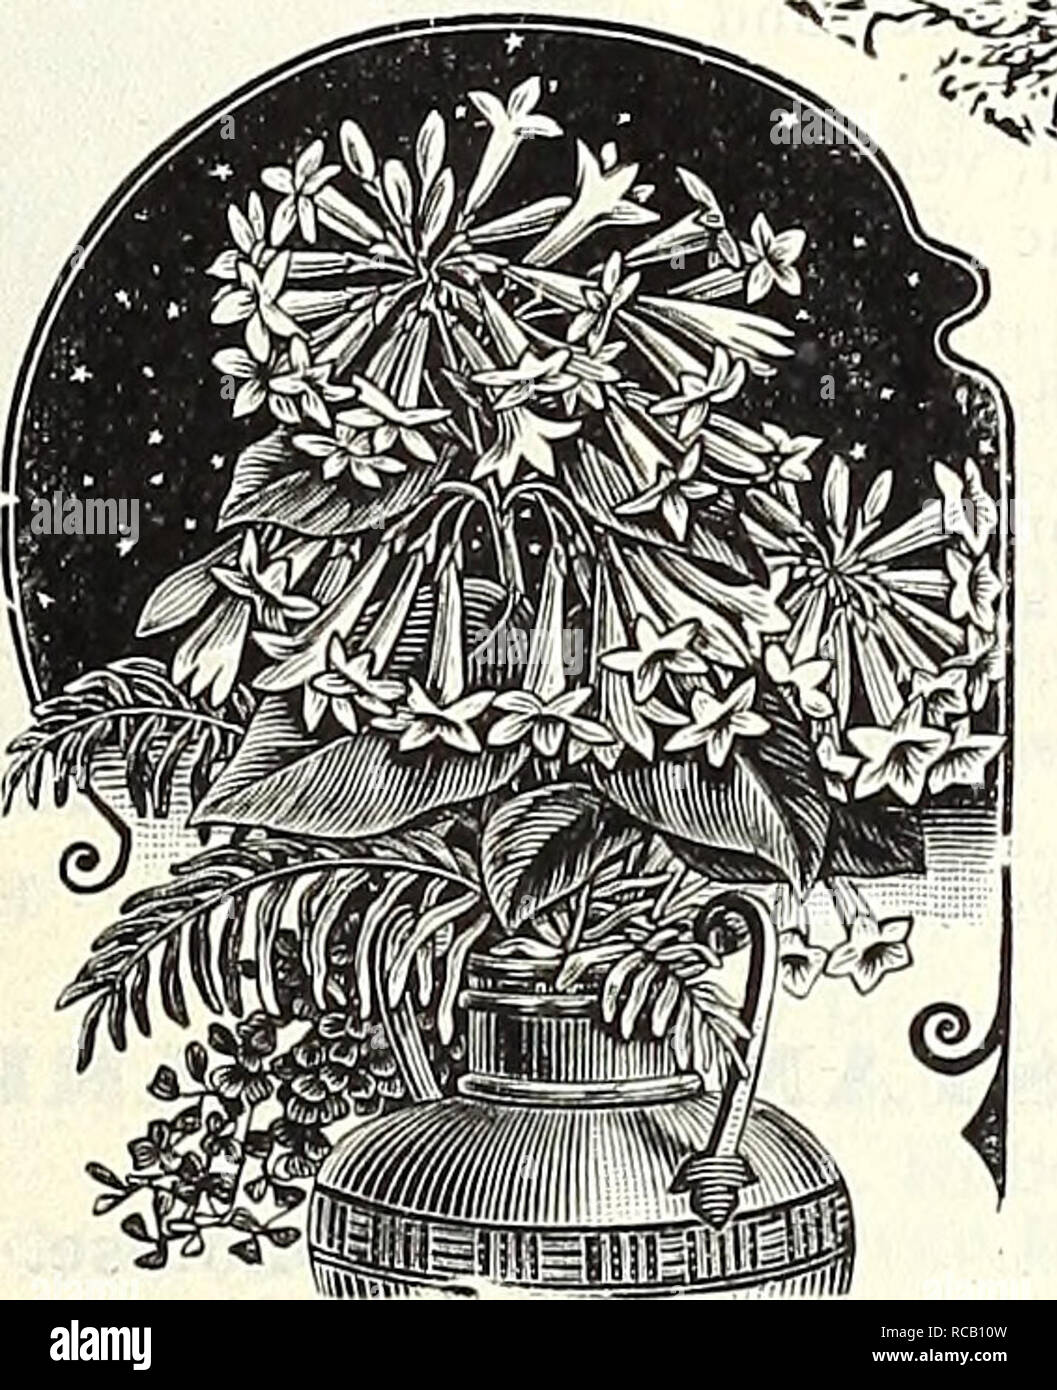 . Dreer's 1838 1908 garden book. Seeds Catalogs; Nursery stock Catalogs; Gardening Equipment and supplies Catalogs; Flowers Seeds Catalogs; Vegetables Seeds Catalogs; Fruit Seeds Catalogs. ci'LENTt:M ' Rl(;pliant's Ear). CALLA LILIES. Cestrum Parqiu. GoLDiiN Yellow Calla Elliottiana. Golden Yellow Calla {Ric/iardia Elliot- tuma). Entirely distinct and unlike all other forms of yellow Callas ; it has the same habit of growth as the ordinary white vaiitty, with flowers of same size and shape, but of a rich, clear, lustrous golden-yellow color; the foliage is dark green, with a number of transluc Stock Photo